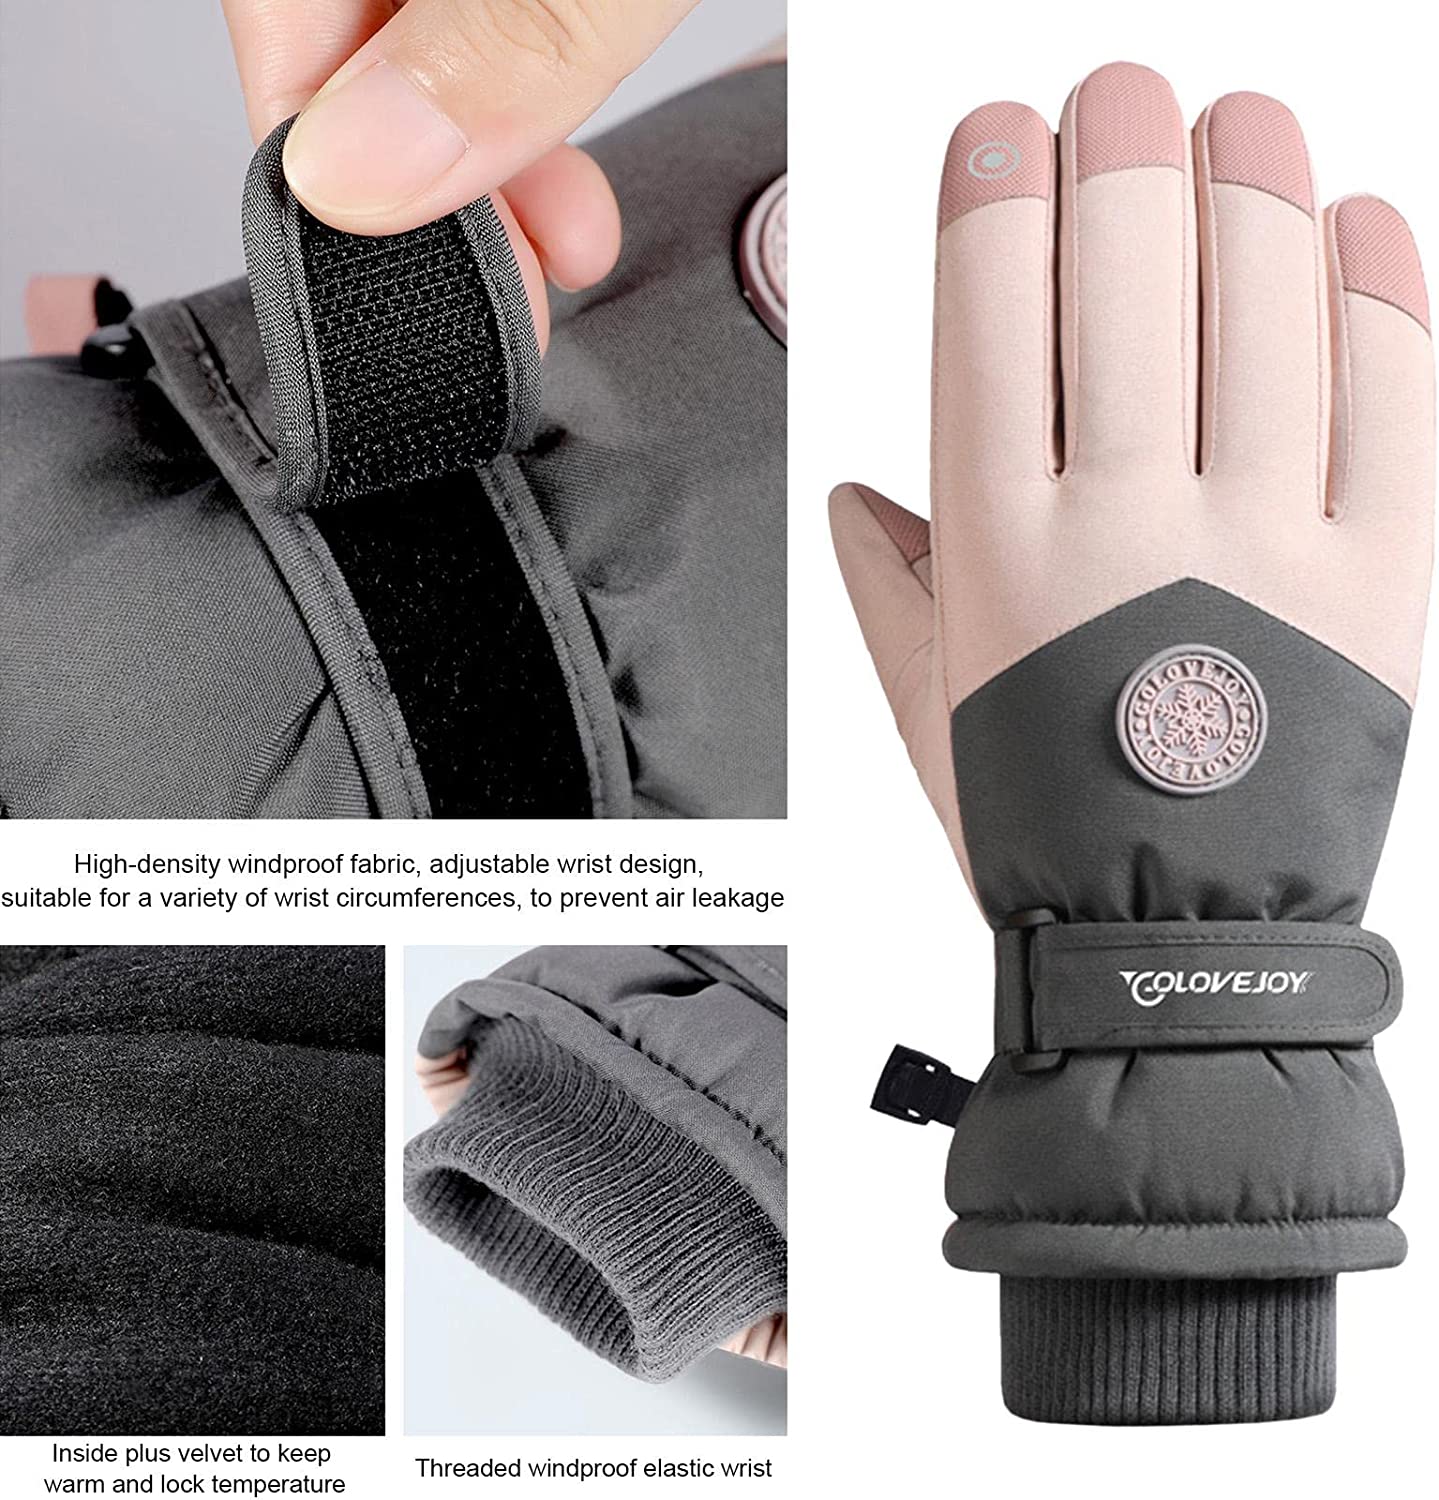 MARKERWAY Waterproof Thermal Gloves Warm Snow Gloves for Men and Women